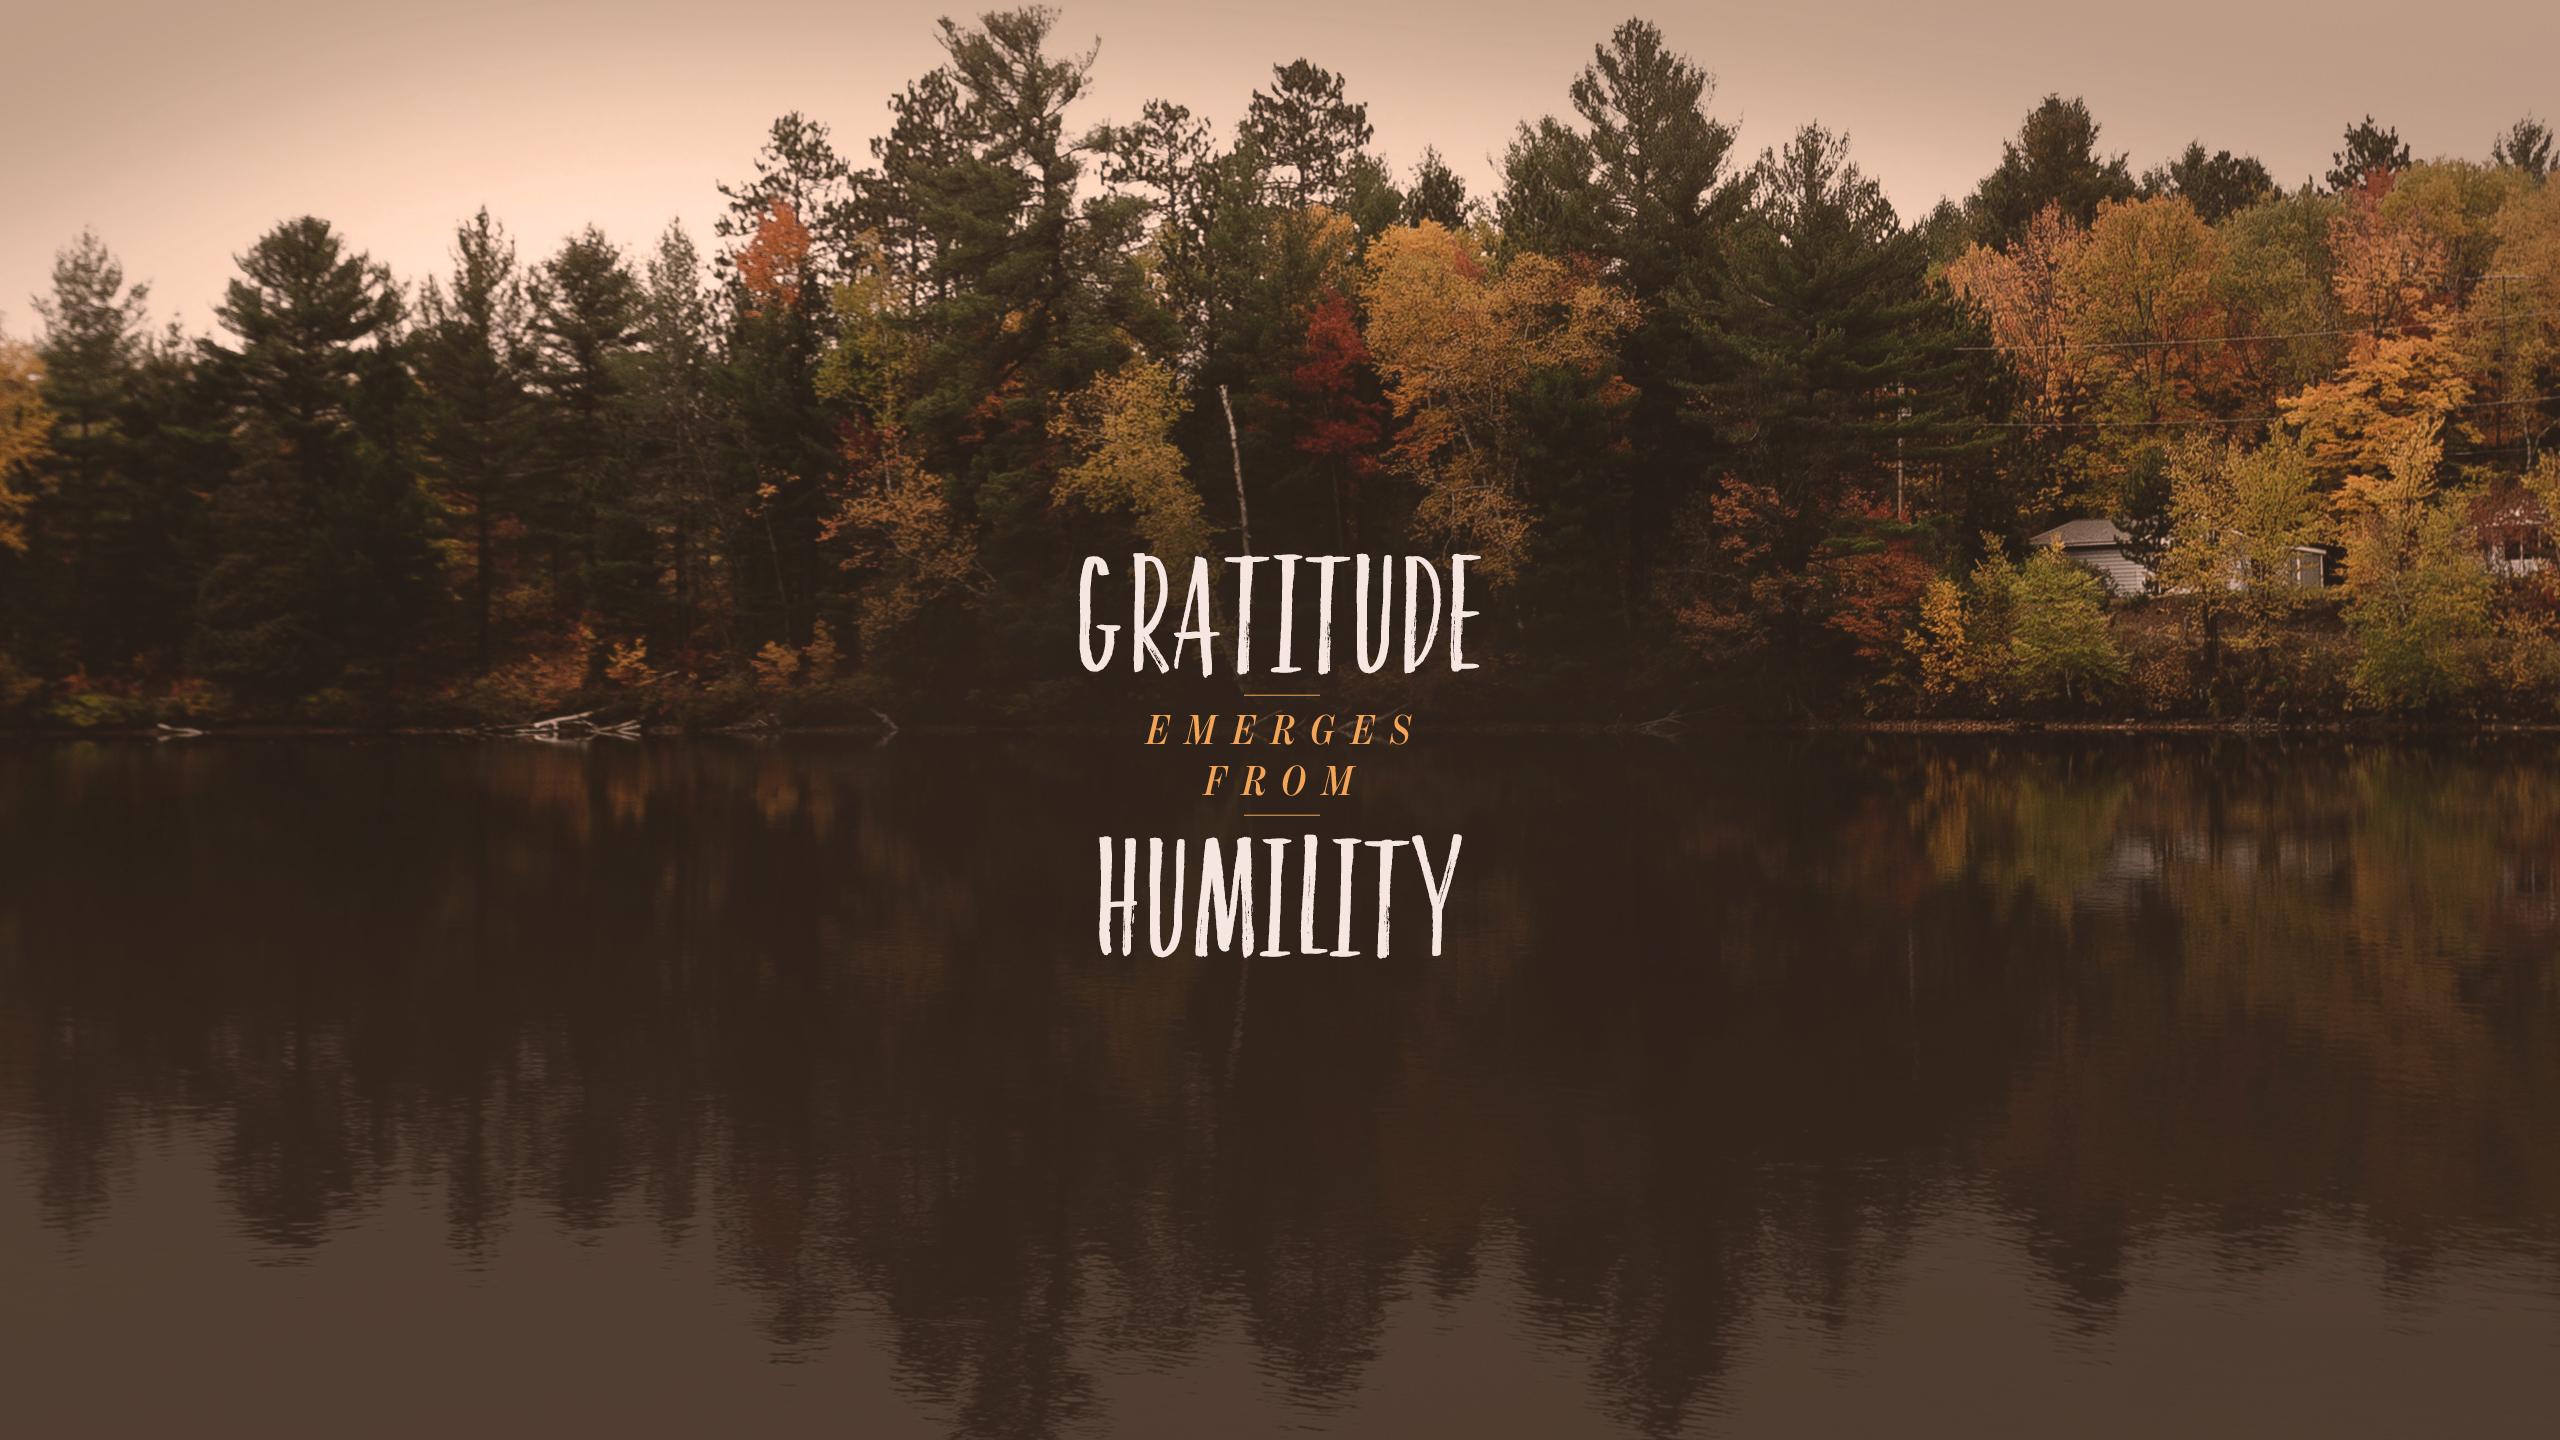 Stay Humble wallpaper by AyoiScreamer  Download on ZEDGE  5546